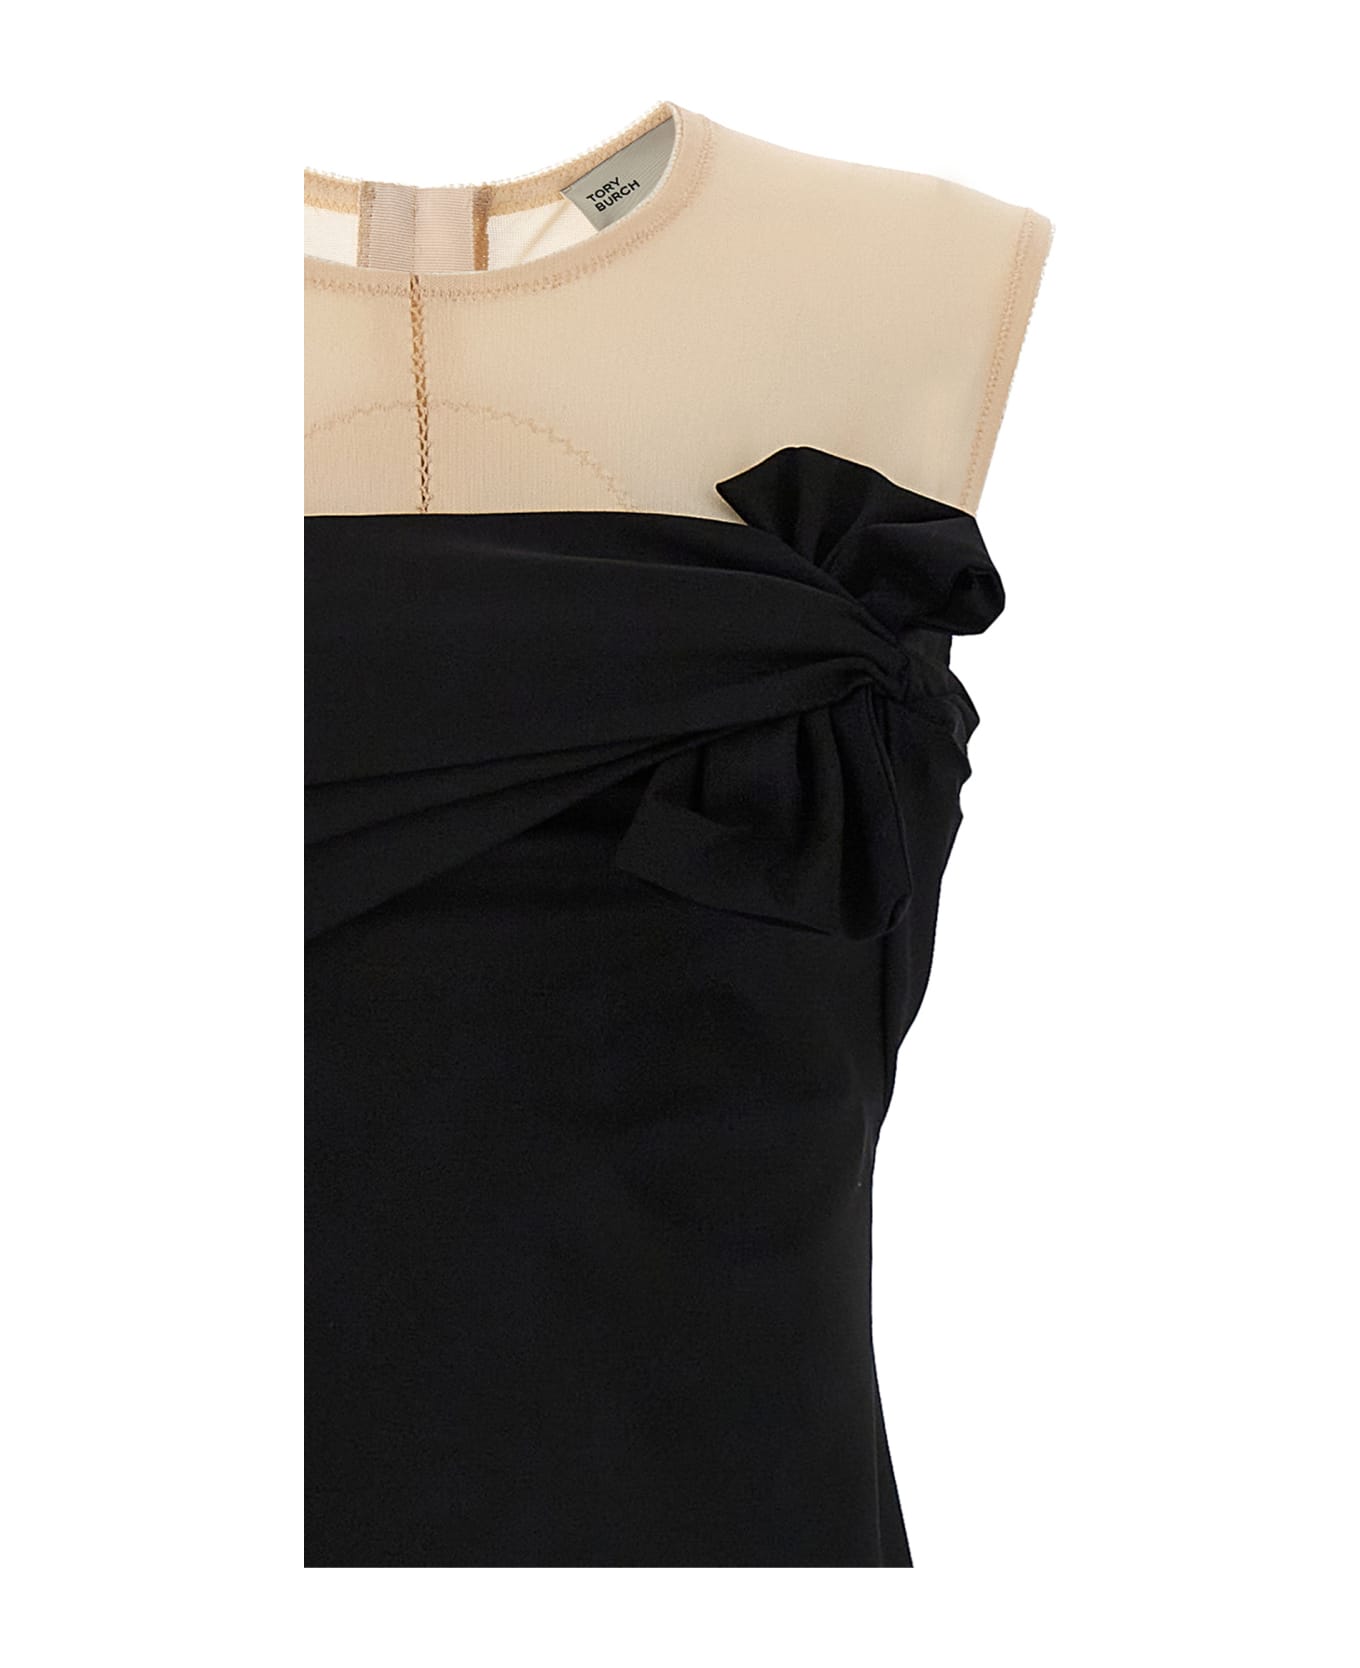 Tory Burch Dress With Front Knot - Black  